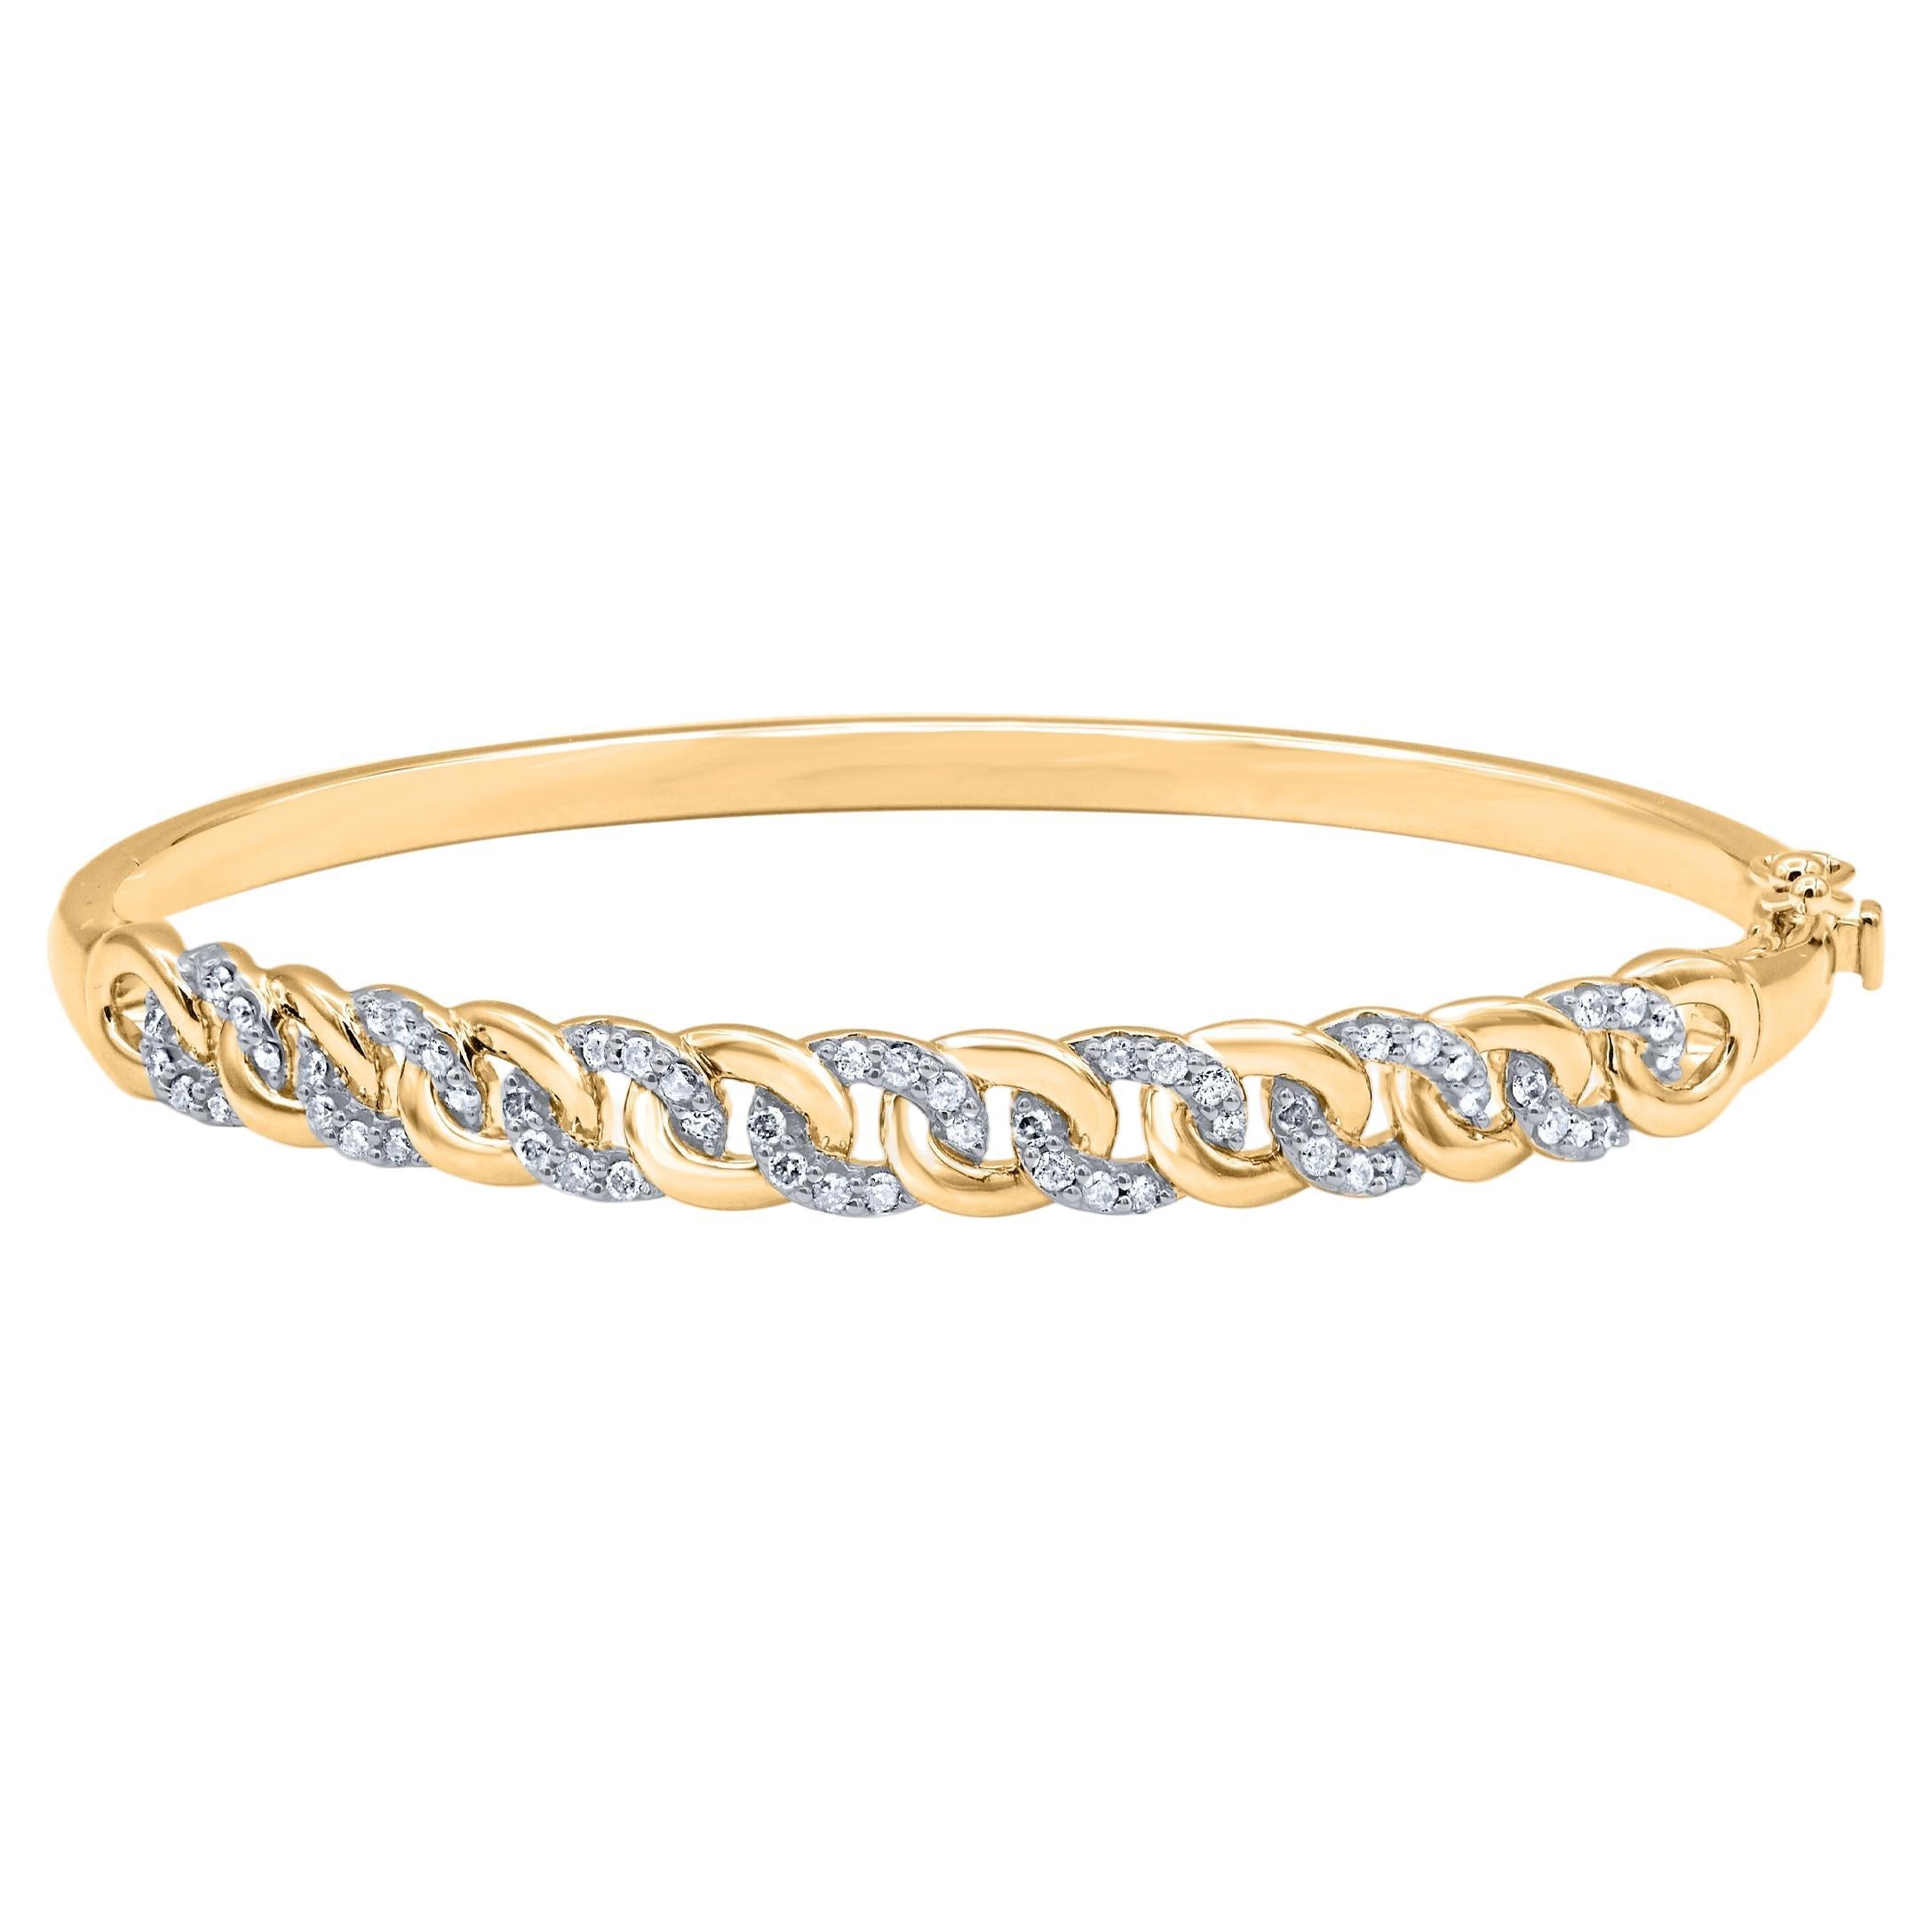 TJD 0.50Ct Natural Round Diamond Interlink Bangle Bracelet in 14KT Yellow Gold For Sale